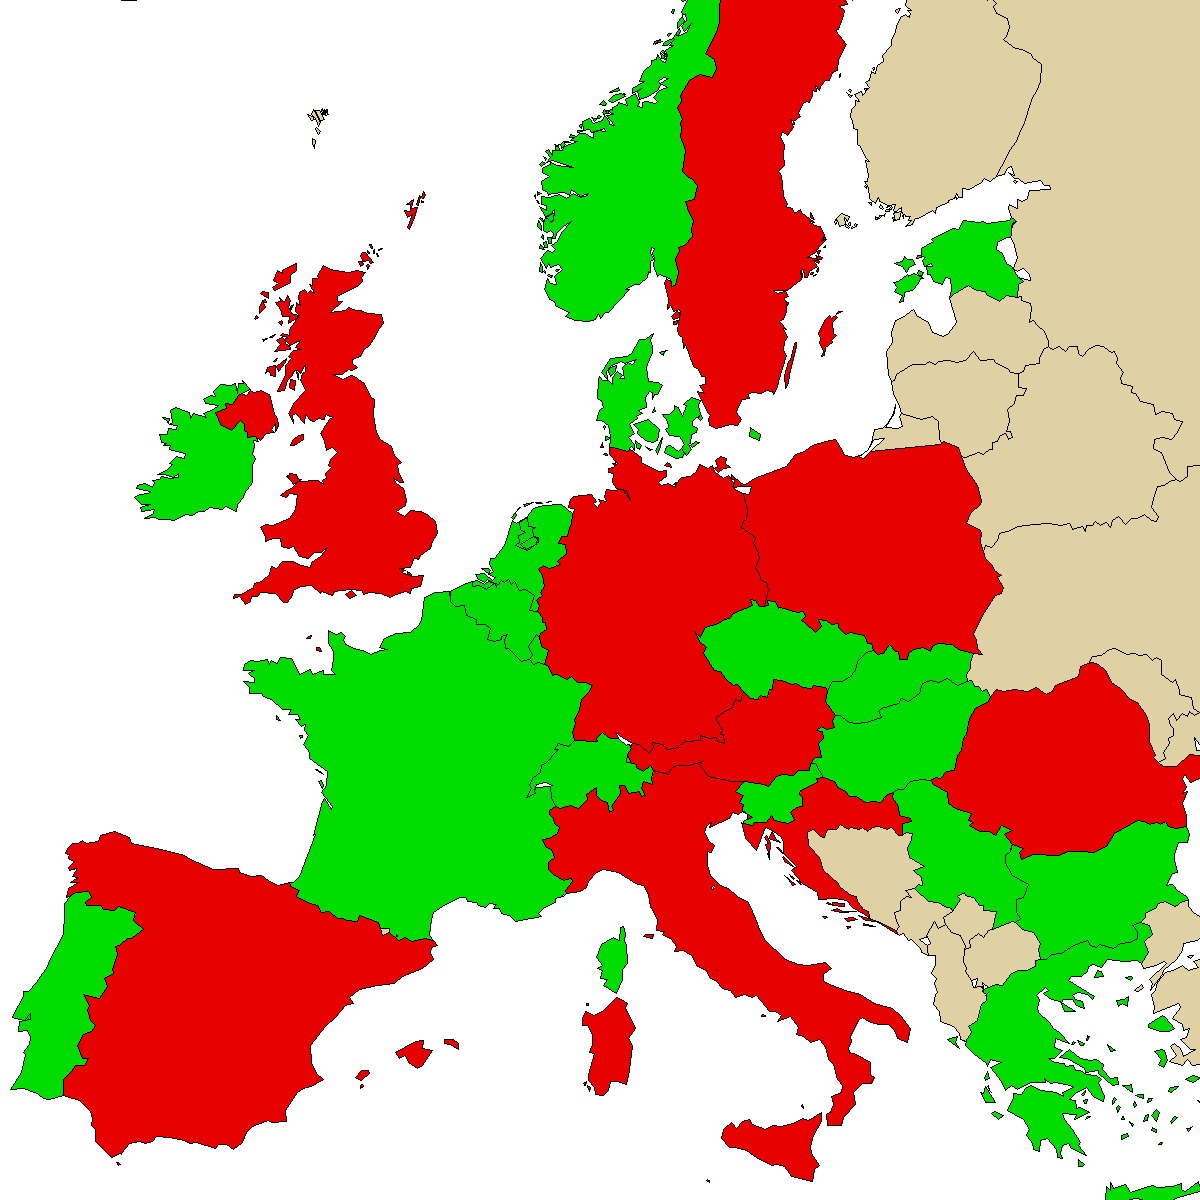 legal info map for our product 2FPM, green are countries with no ban, red with ban, grey is unknown